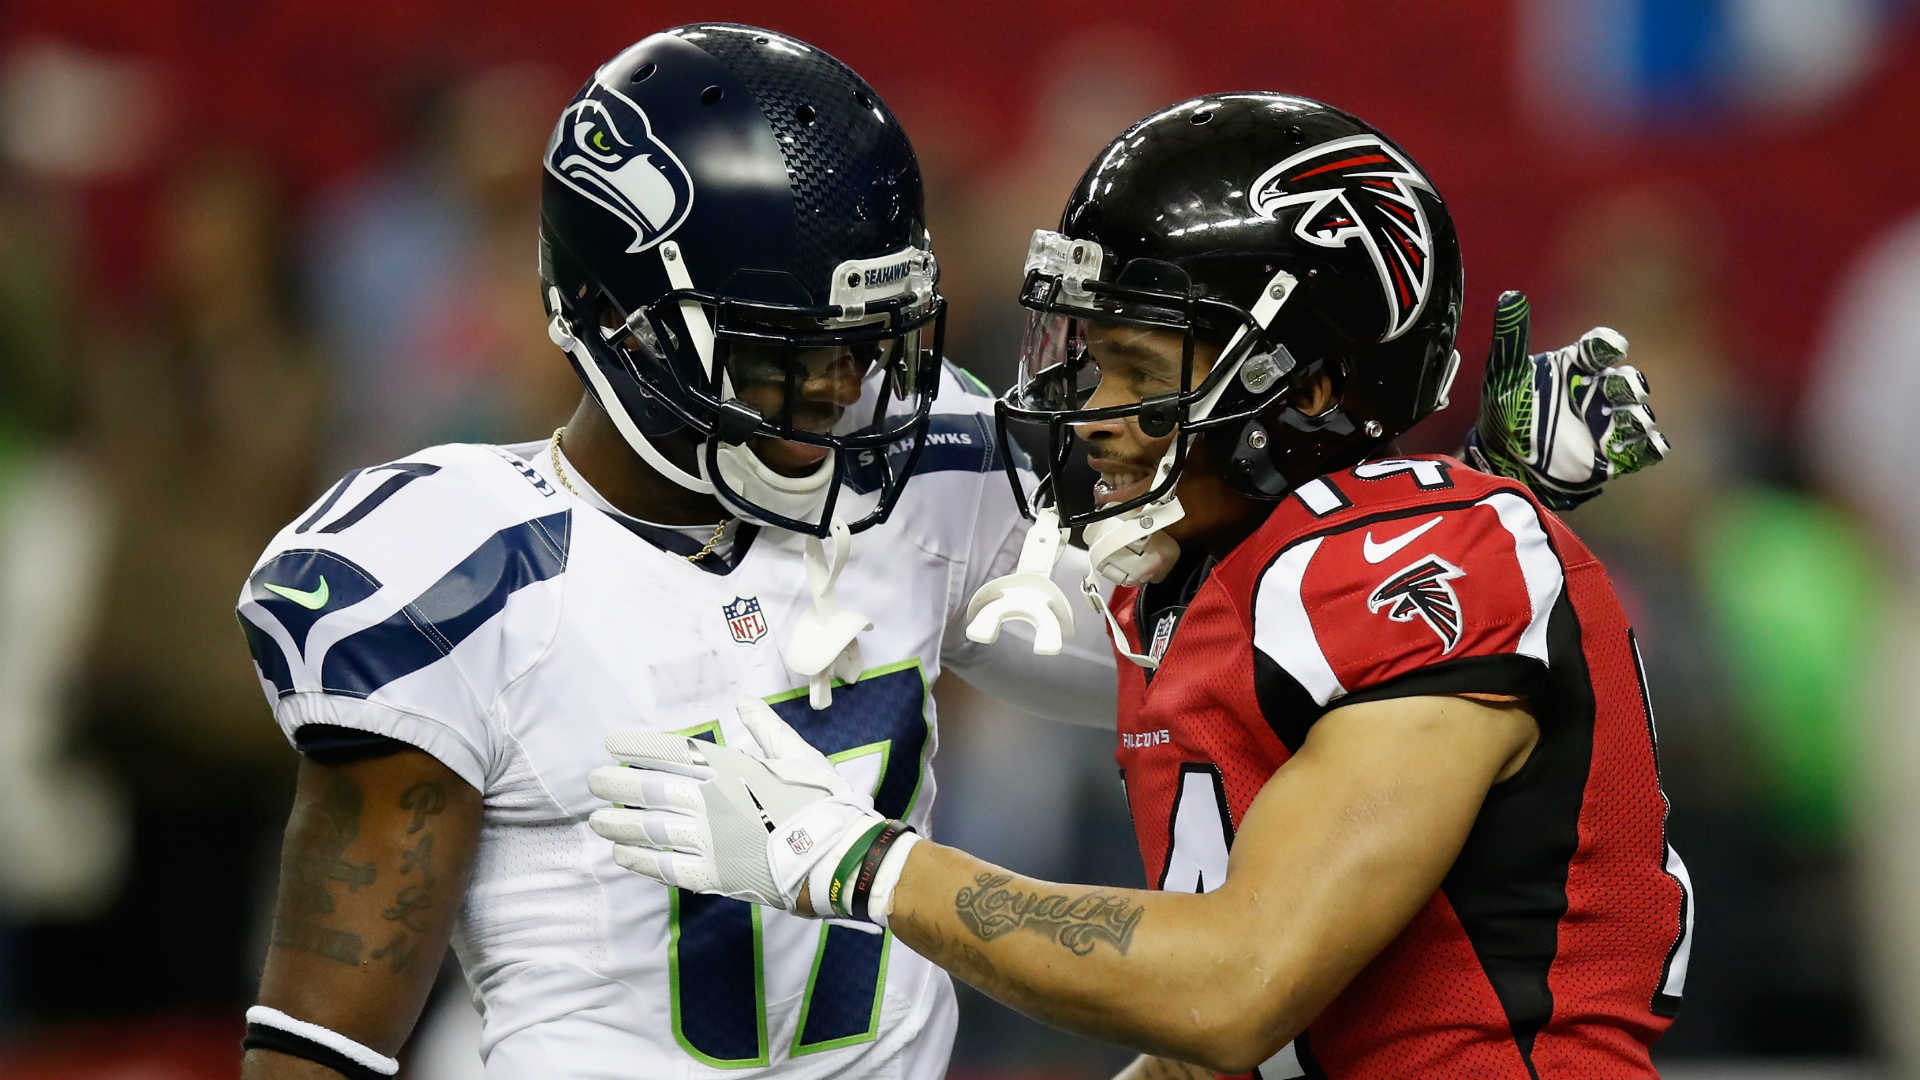 Seahawks get spark from Devin Hester, but then blow it. NFL